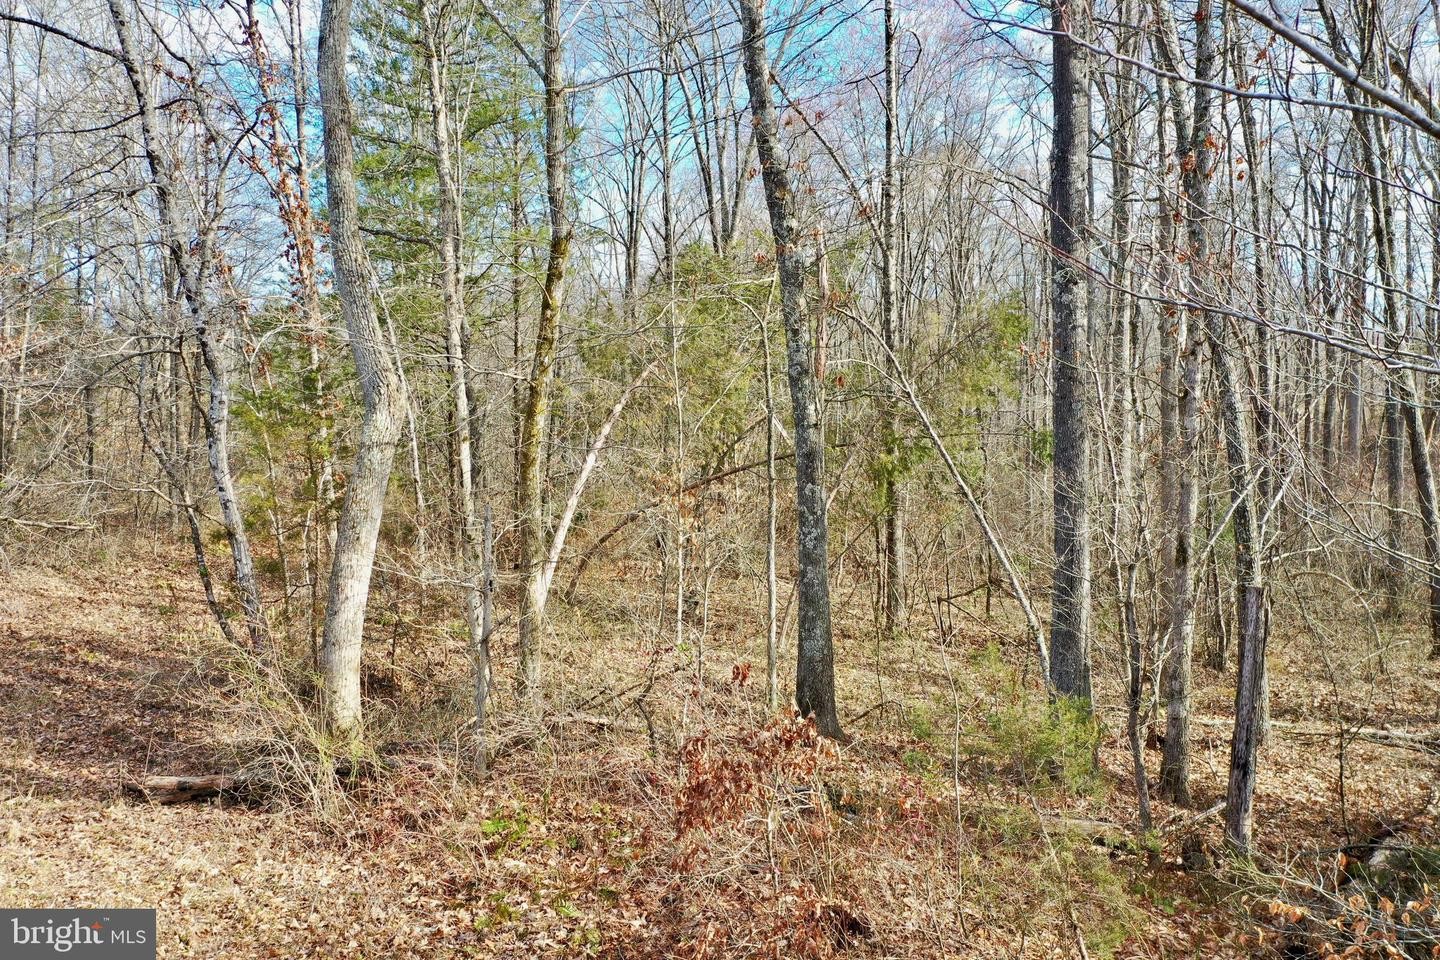 40. Tbd Ancient Acres Rd